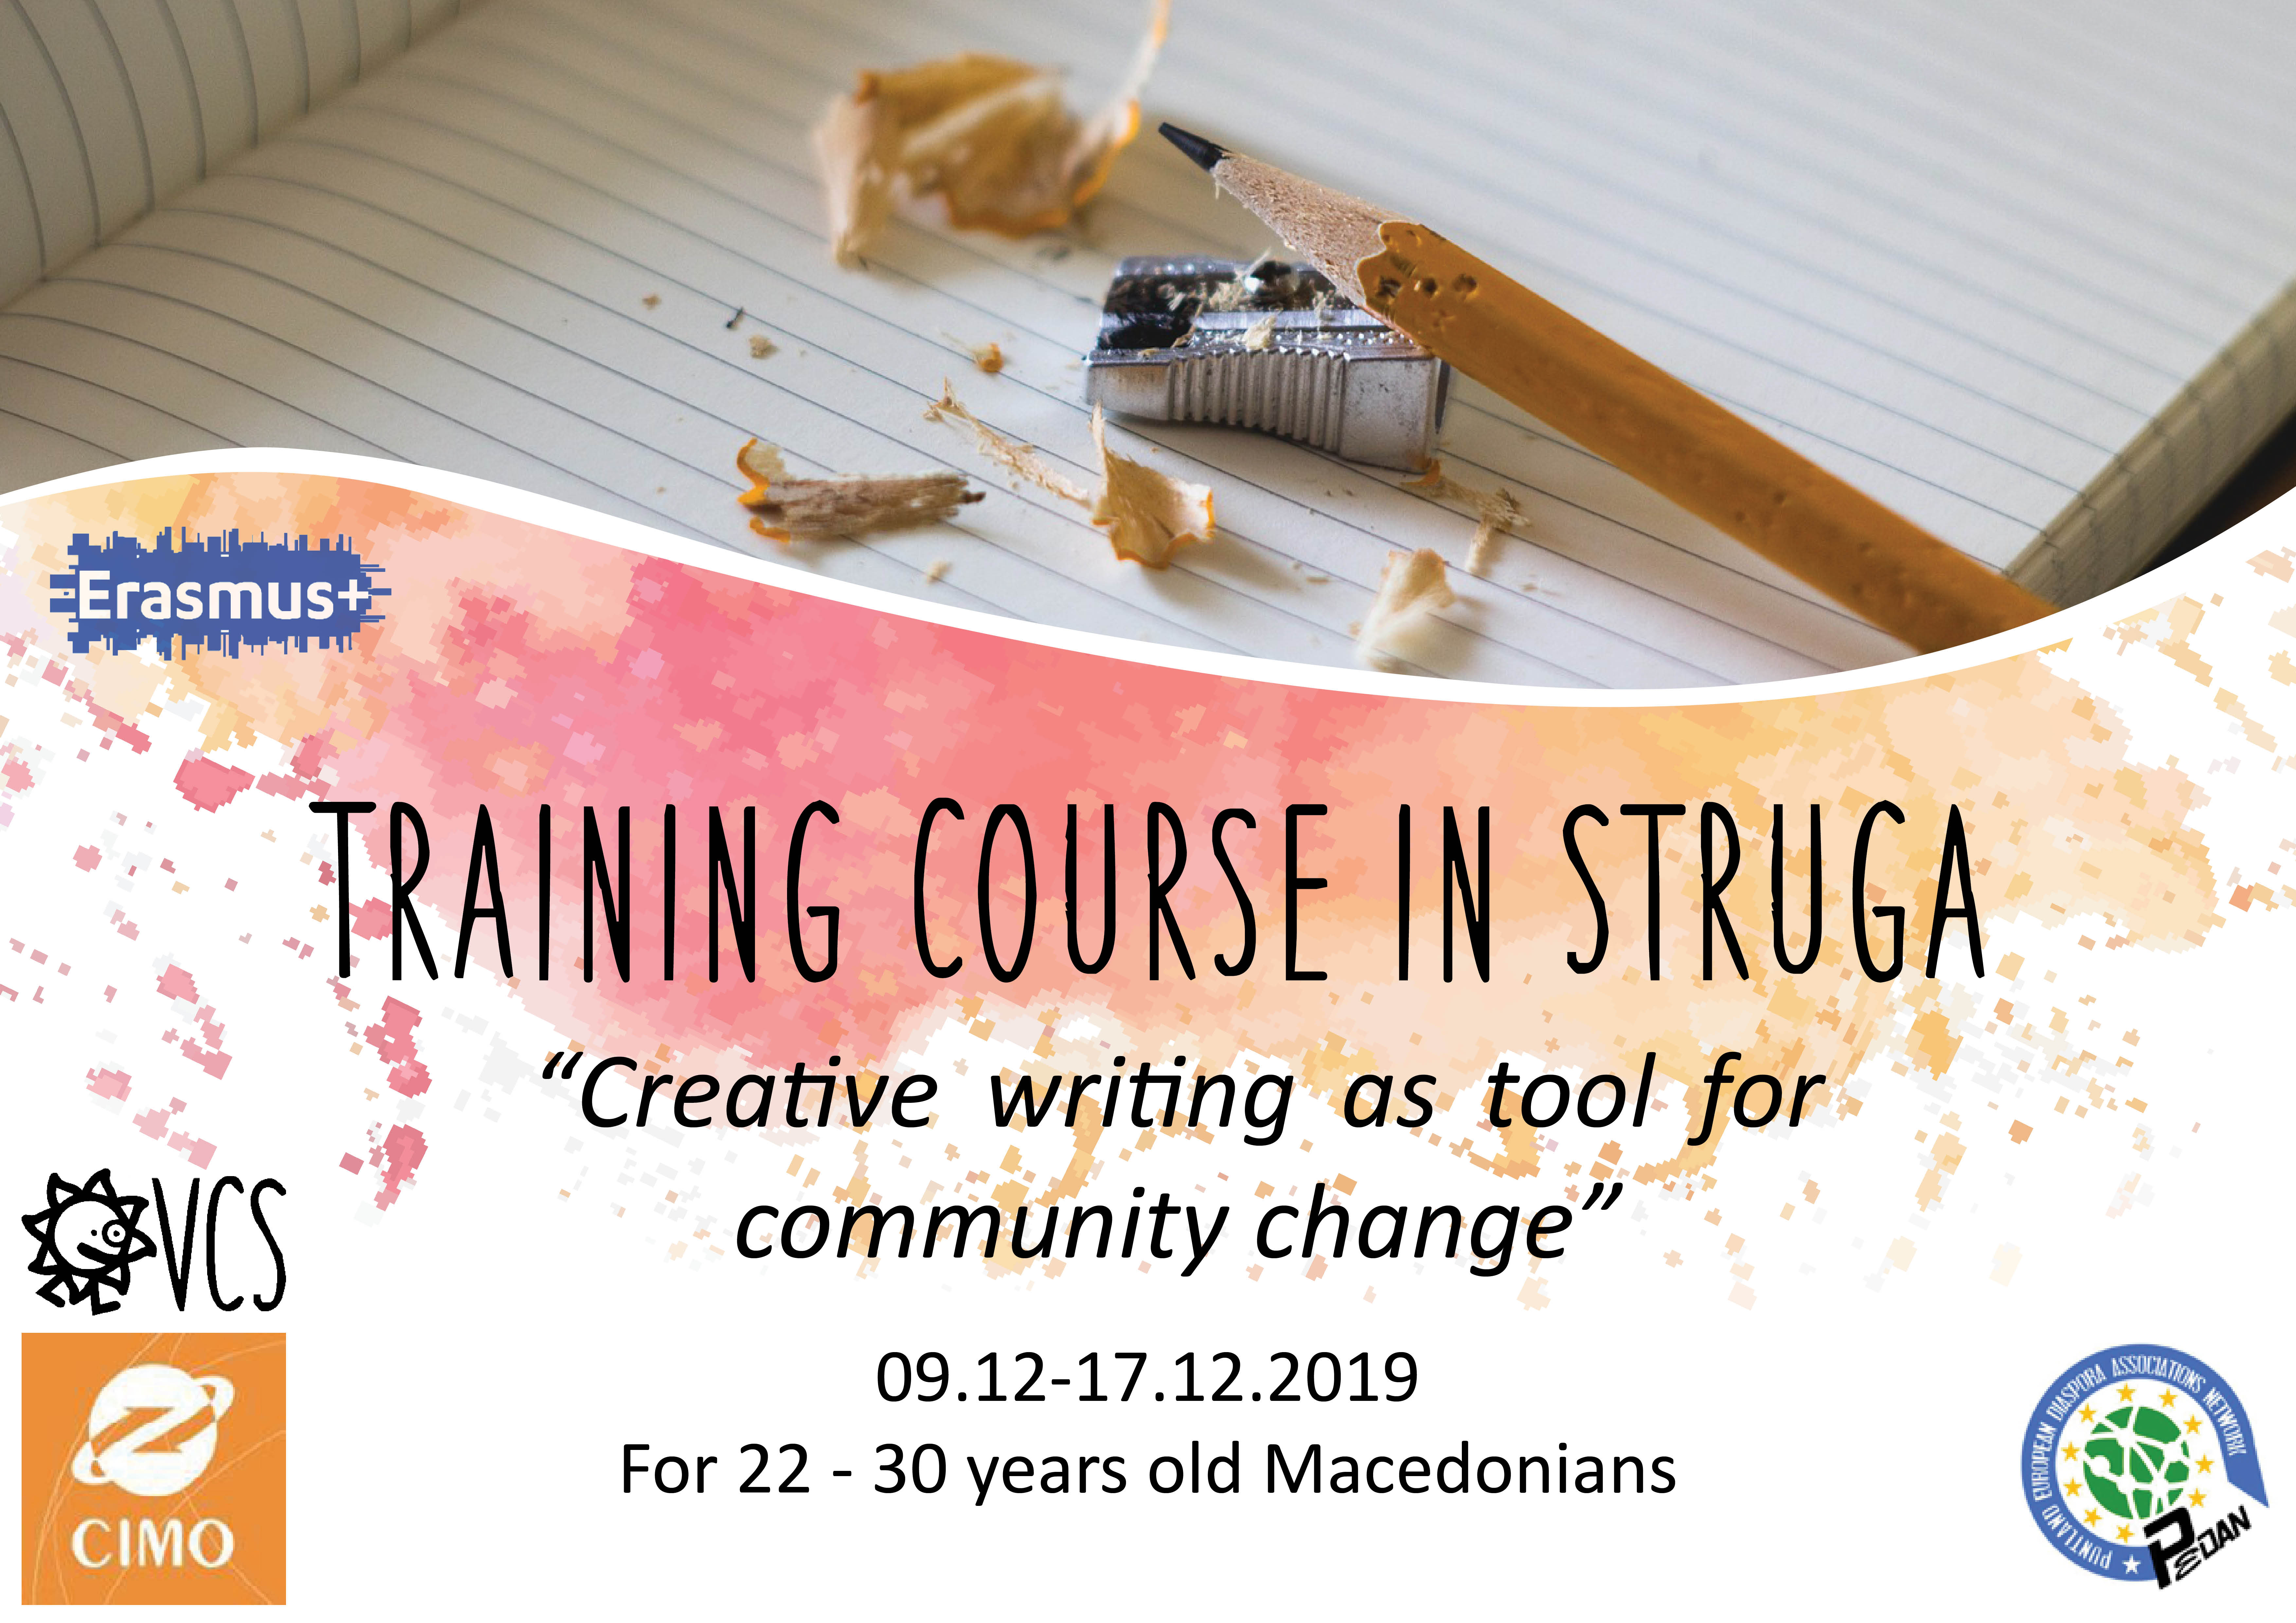 You are currently viewing Call for participants for Training Course in Struga, Macedonia!